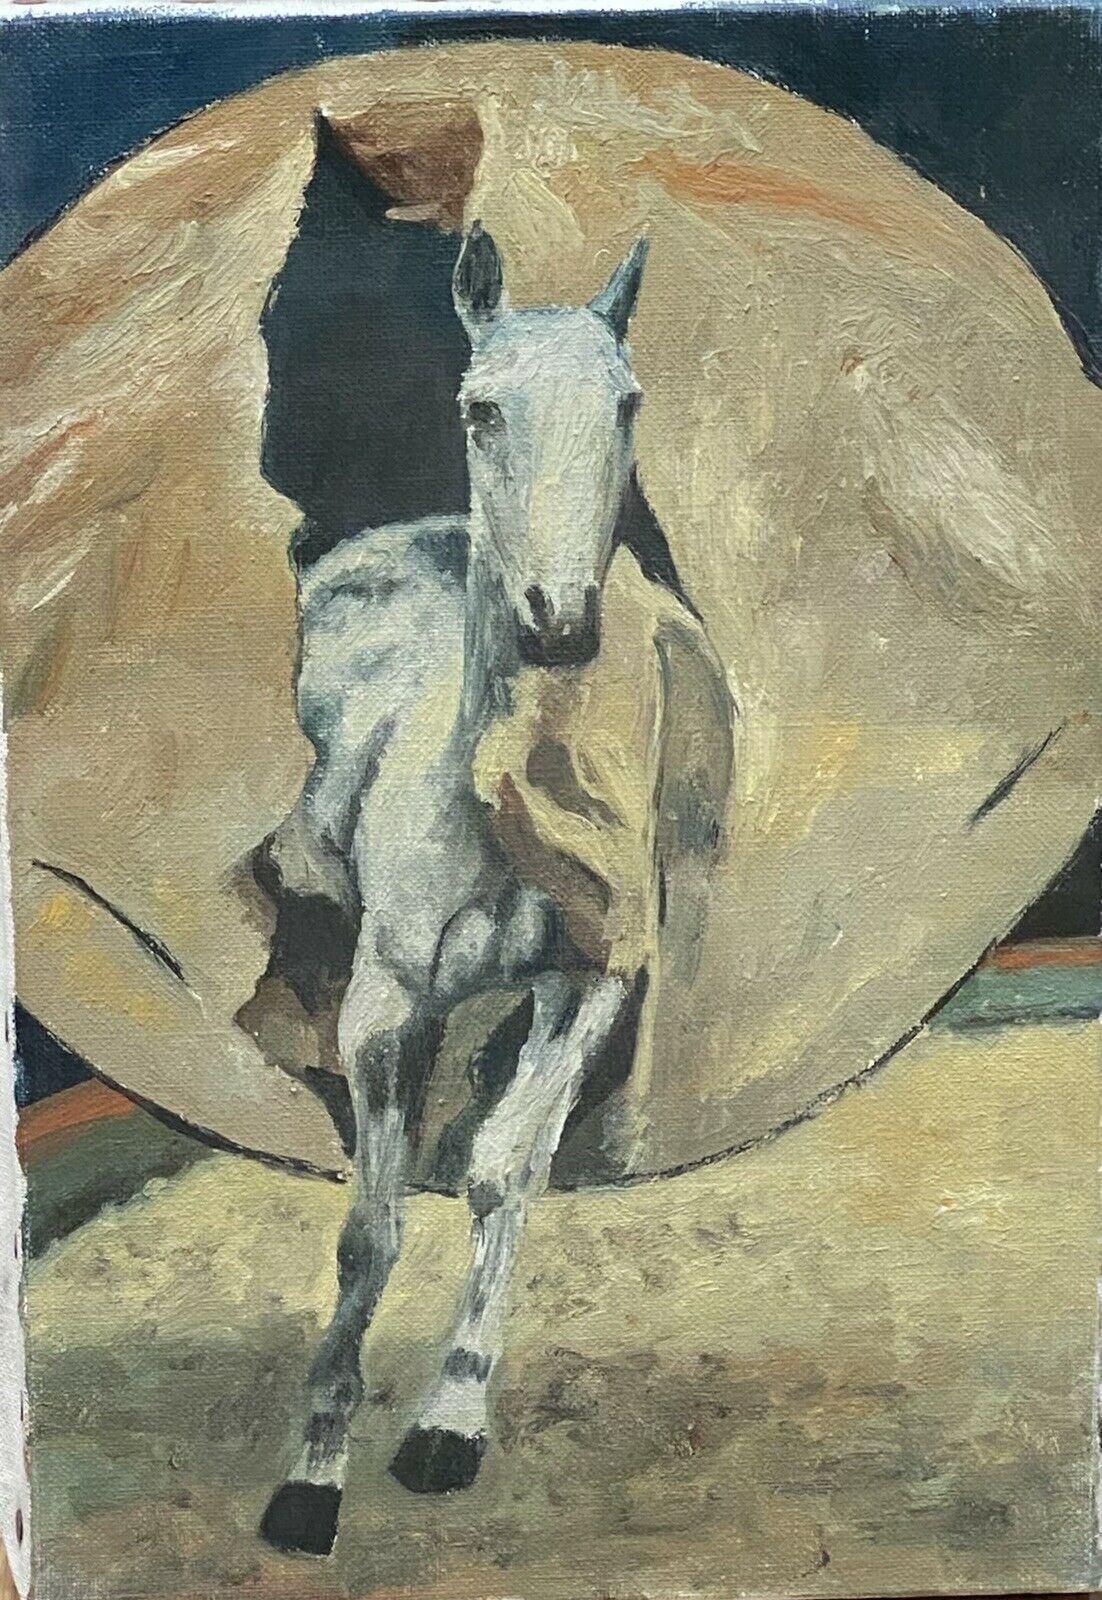 "The Circus Horse"
by Fernand Audet (French, Tarascon 1923- Mulhouse 2016)
oil painting on canvas, unframed

painting: 13 x 8.5 inches

Condition report: 
Very sound, with some old surface dirt from storage and uneven edges, but generally speaking